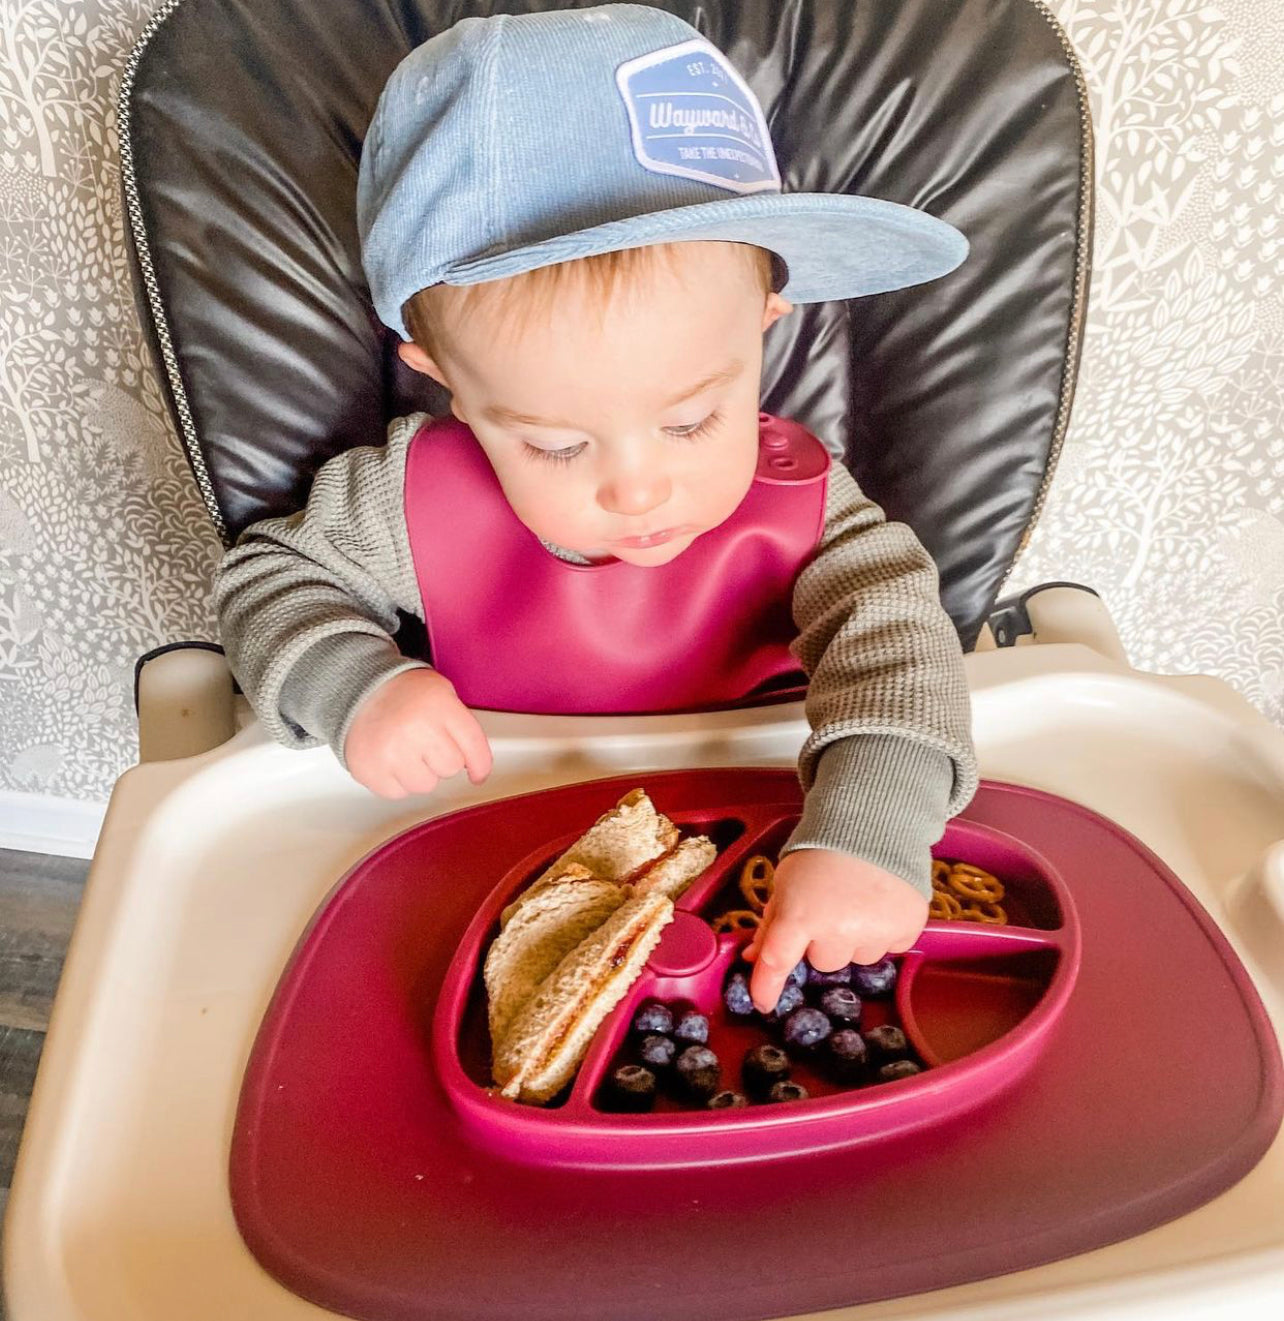 Bazzle Baby Anchor Silicone Mat in cranberry. Suctions to flat surfaces to not fall or slip.